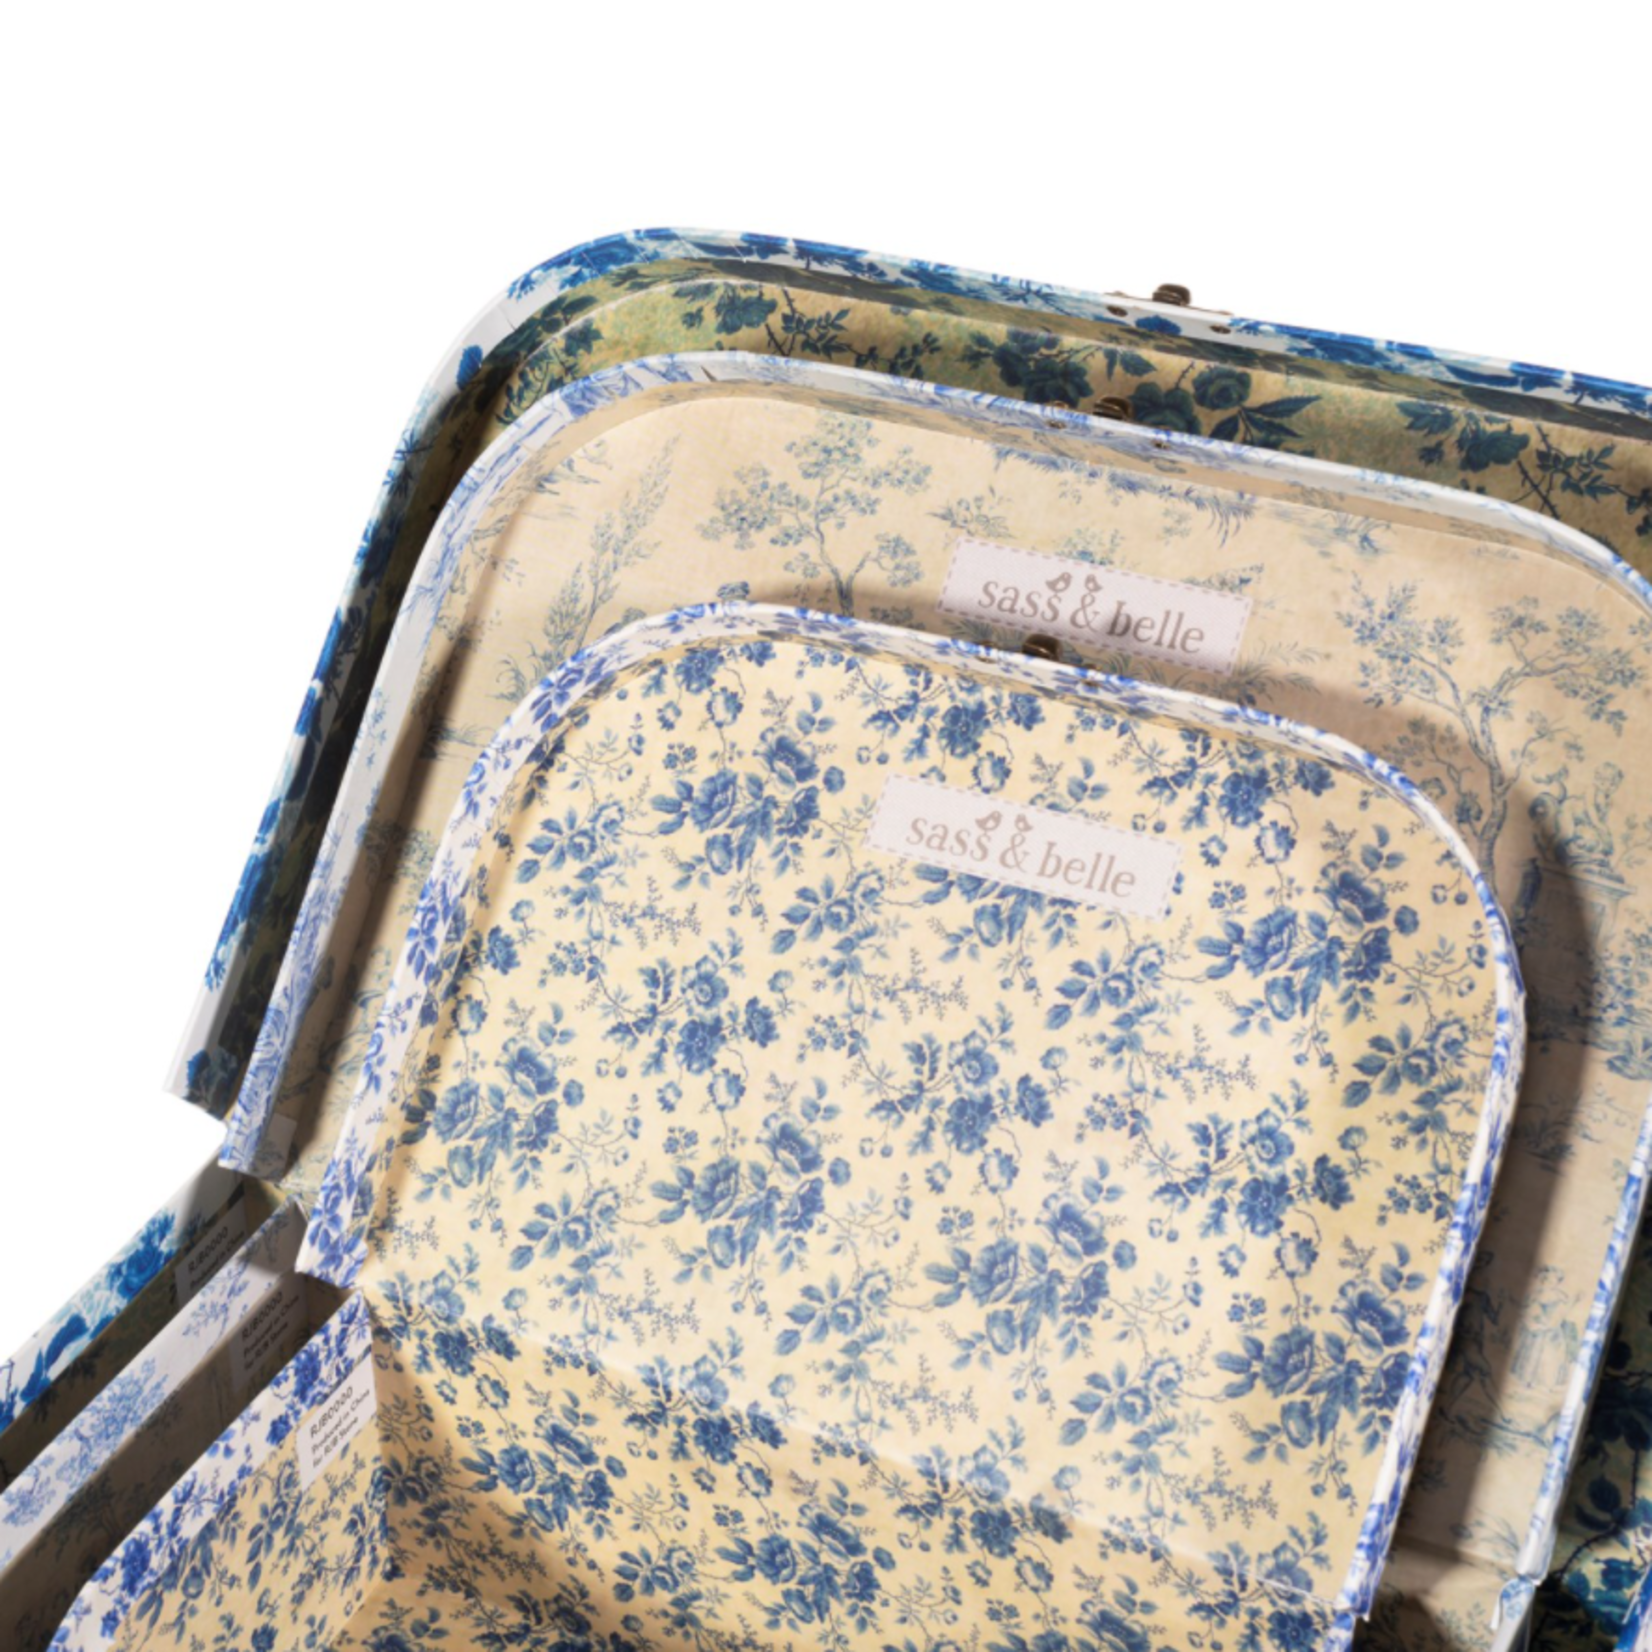 Sass and Belle .Celeste Blue and White Floral Suitcases